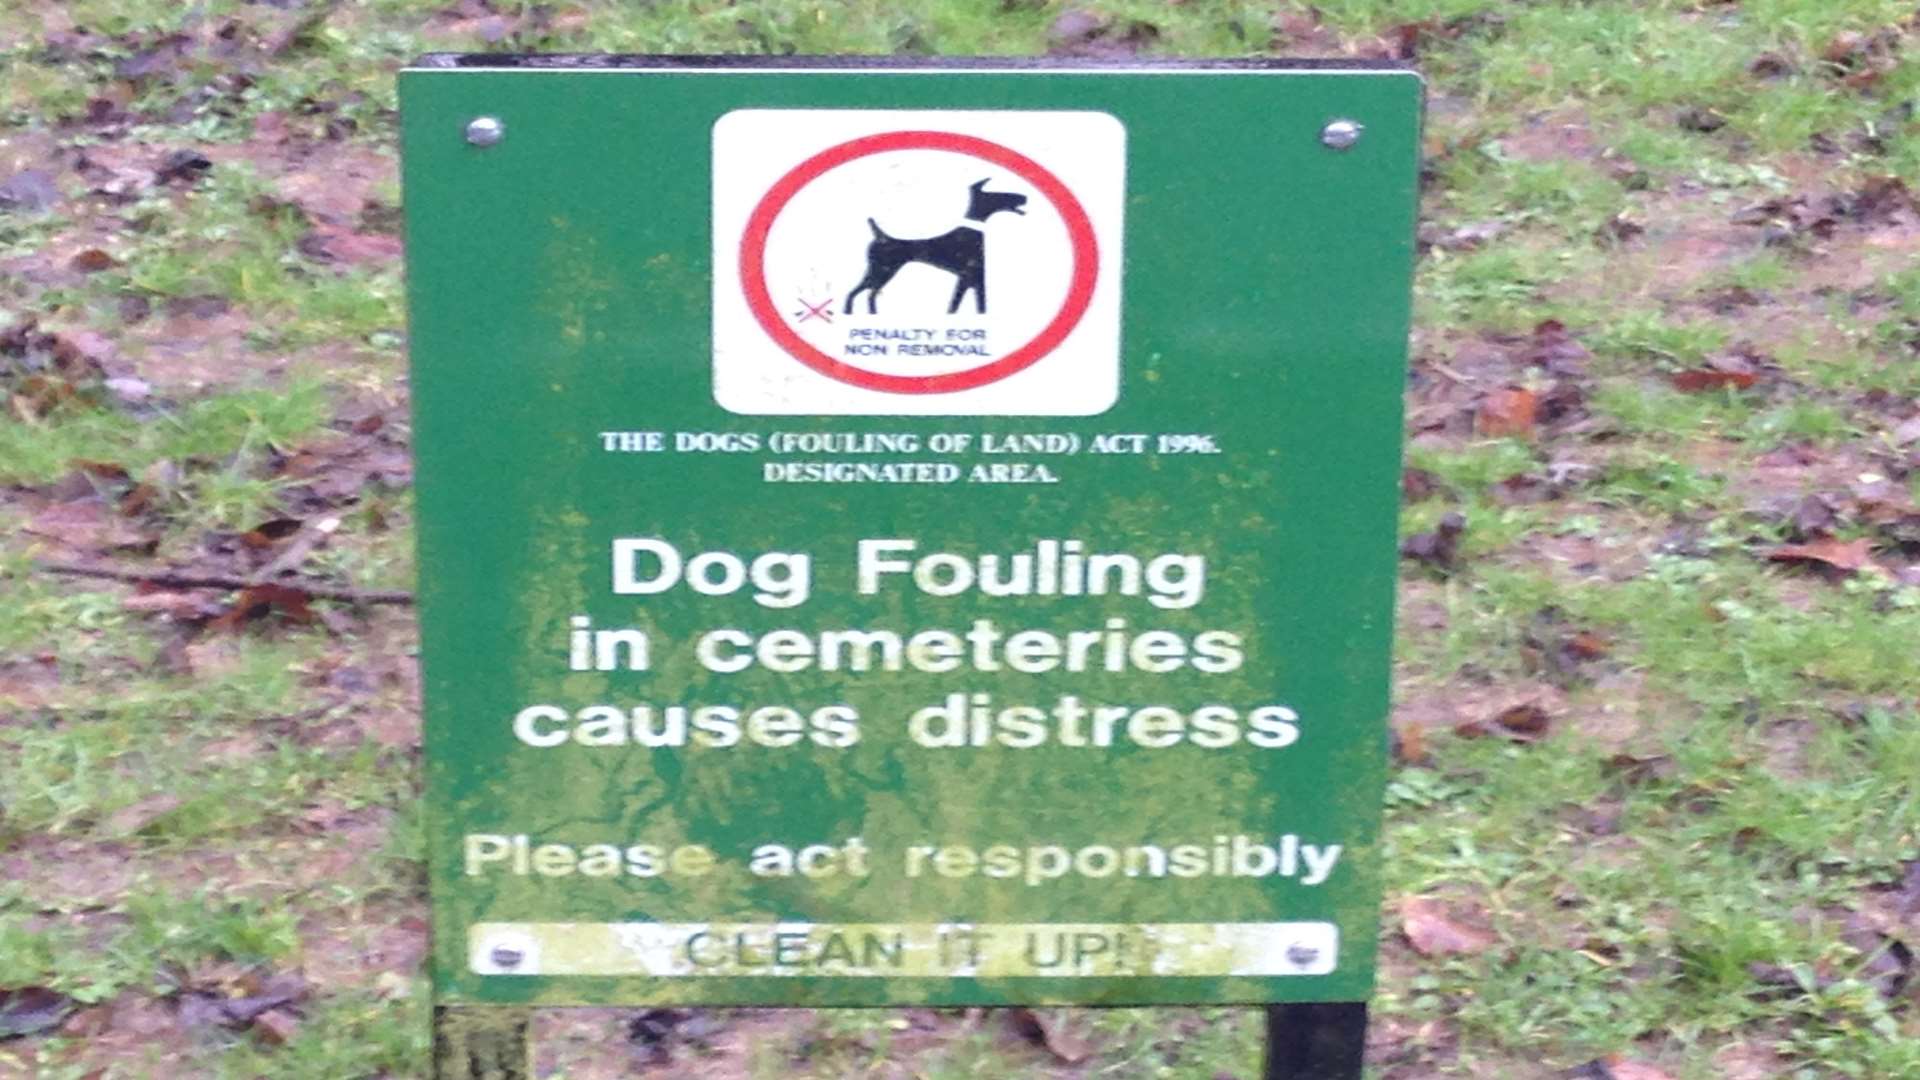 Signs advising owners to clean up after their dogs in Bybrook Cemetery went up in 2014